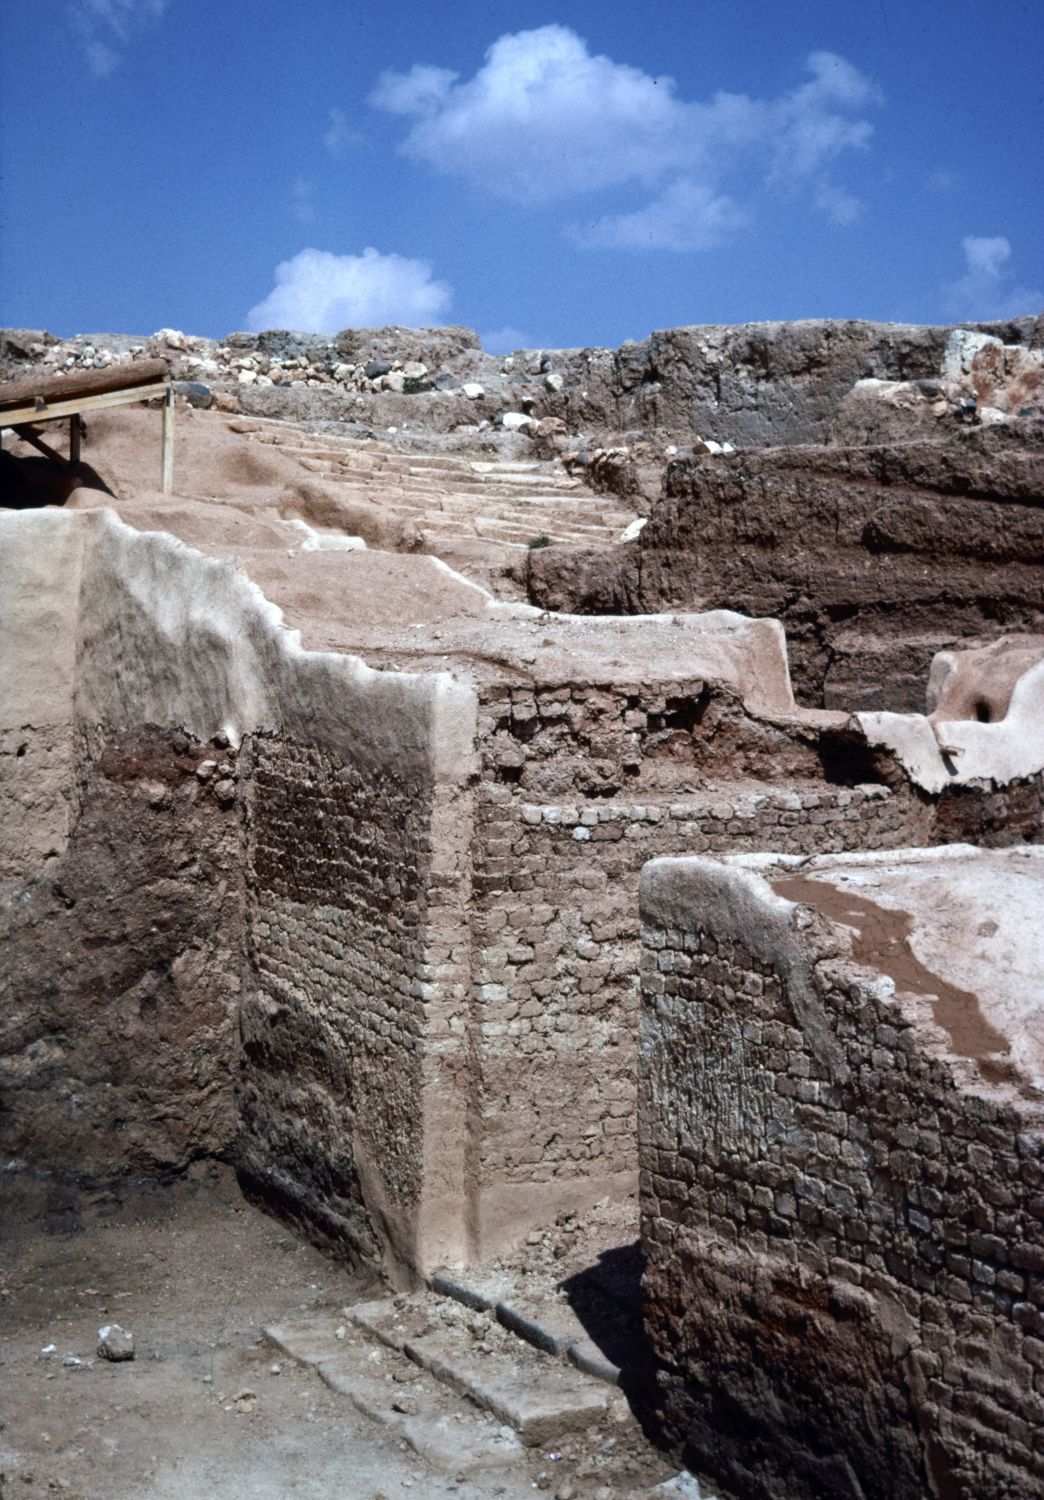 Palace complex, view of excavated buildings near staircase.